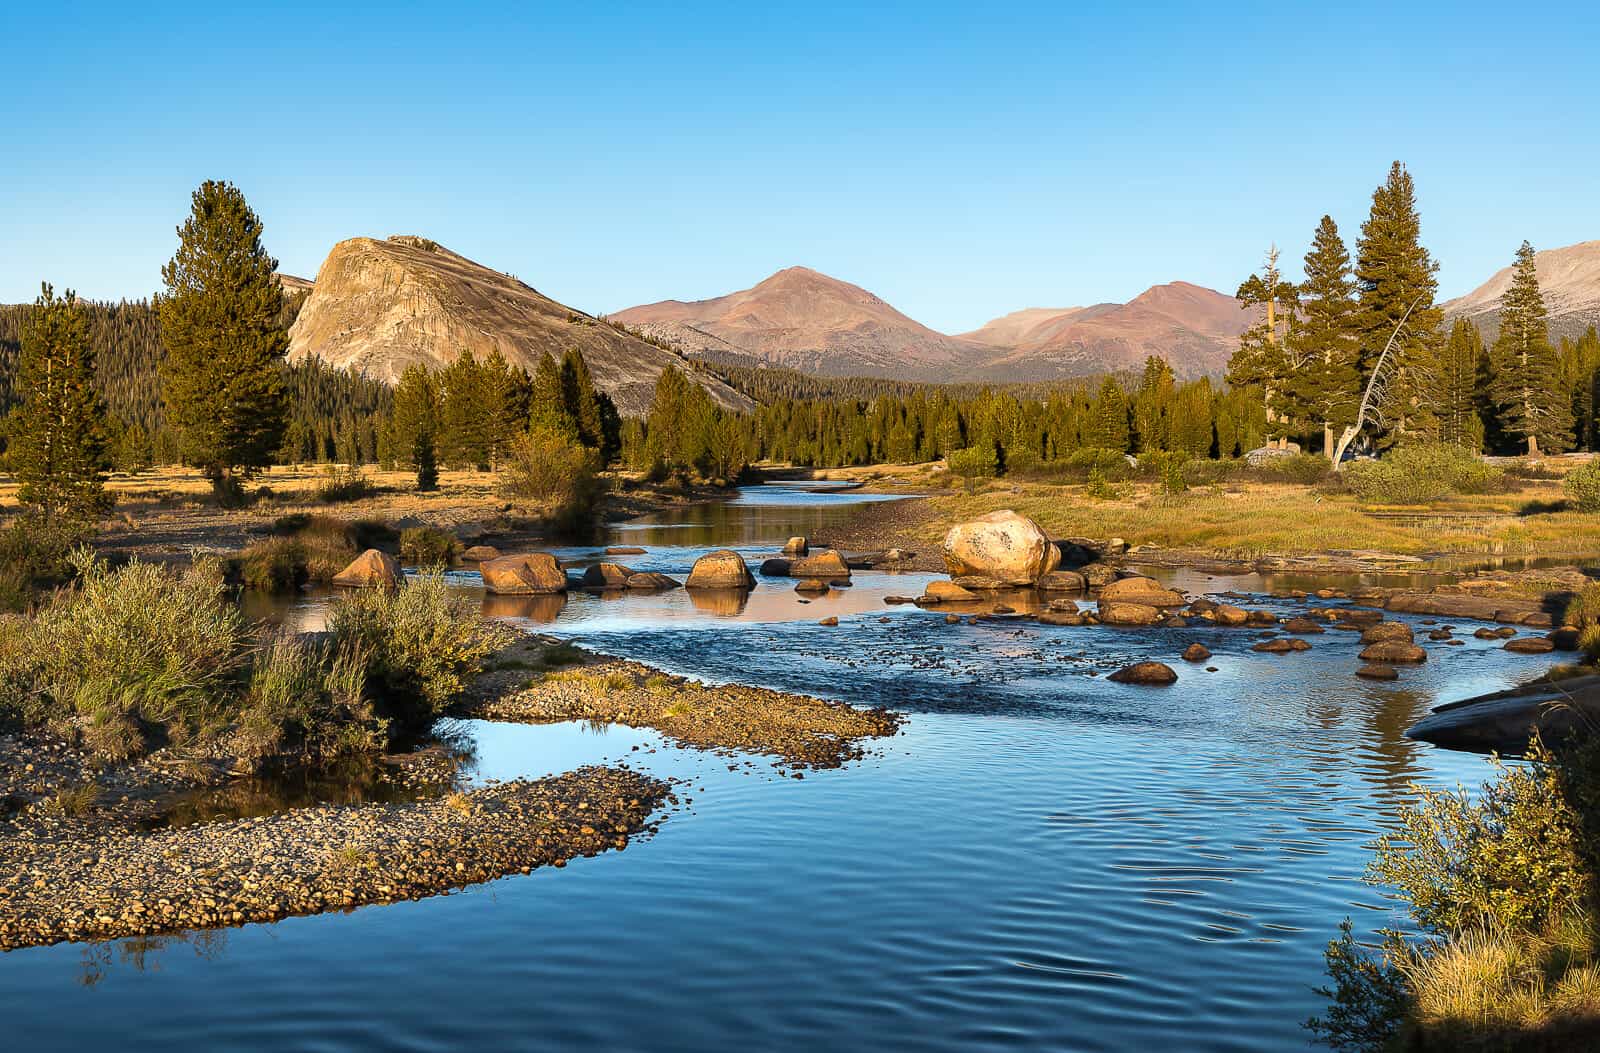 Tranquil scene at Tuolumne Meadows in Yosemite National Park with the serene Tuolumne River flowing through, dotted with rocks and surrounded by lush meadows and forested peaks under a clear blue sky